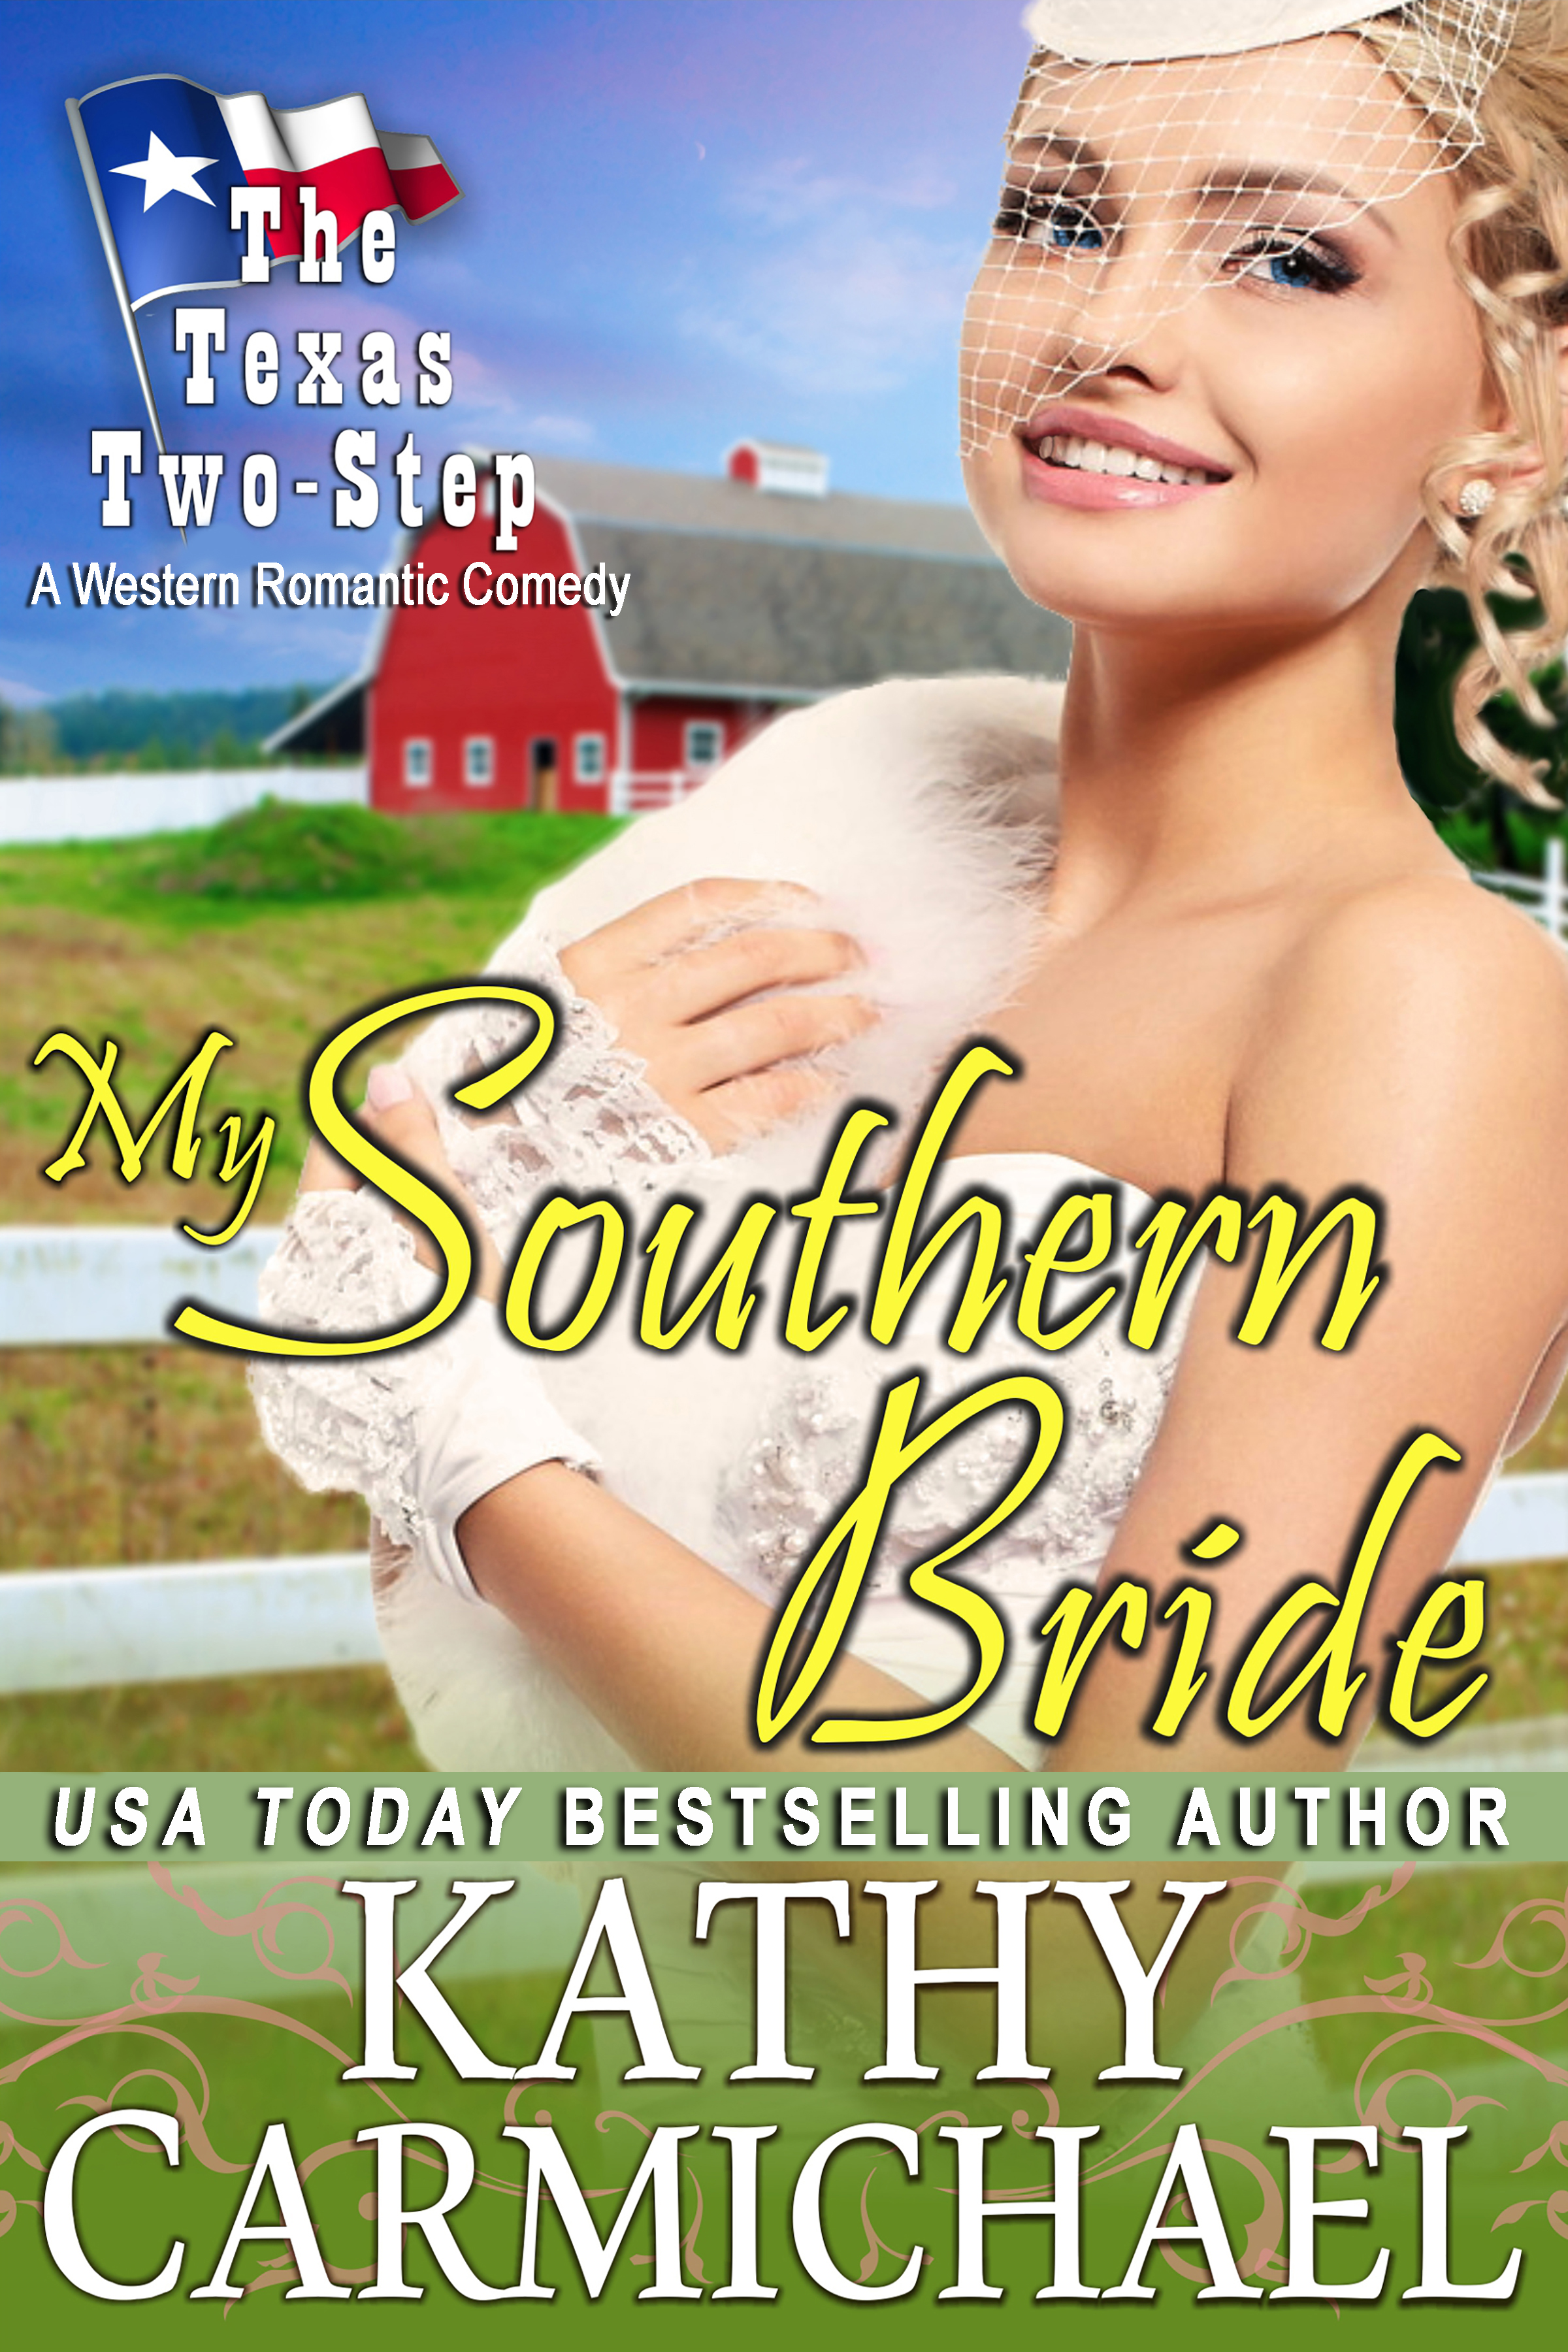 My Southern Bride cover